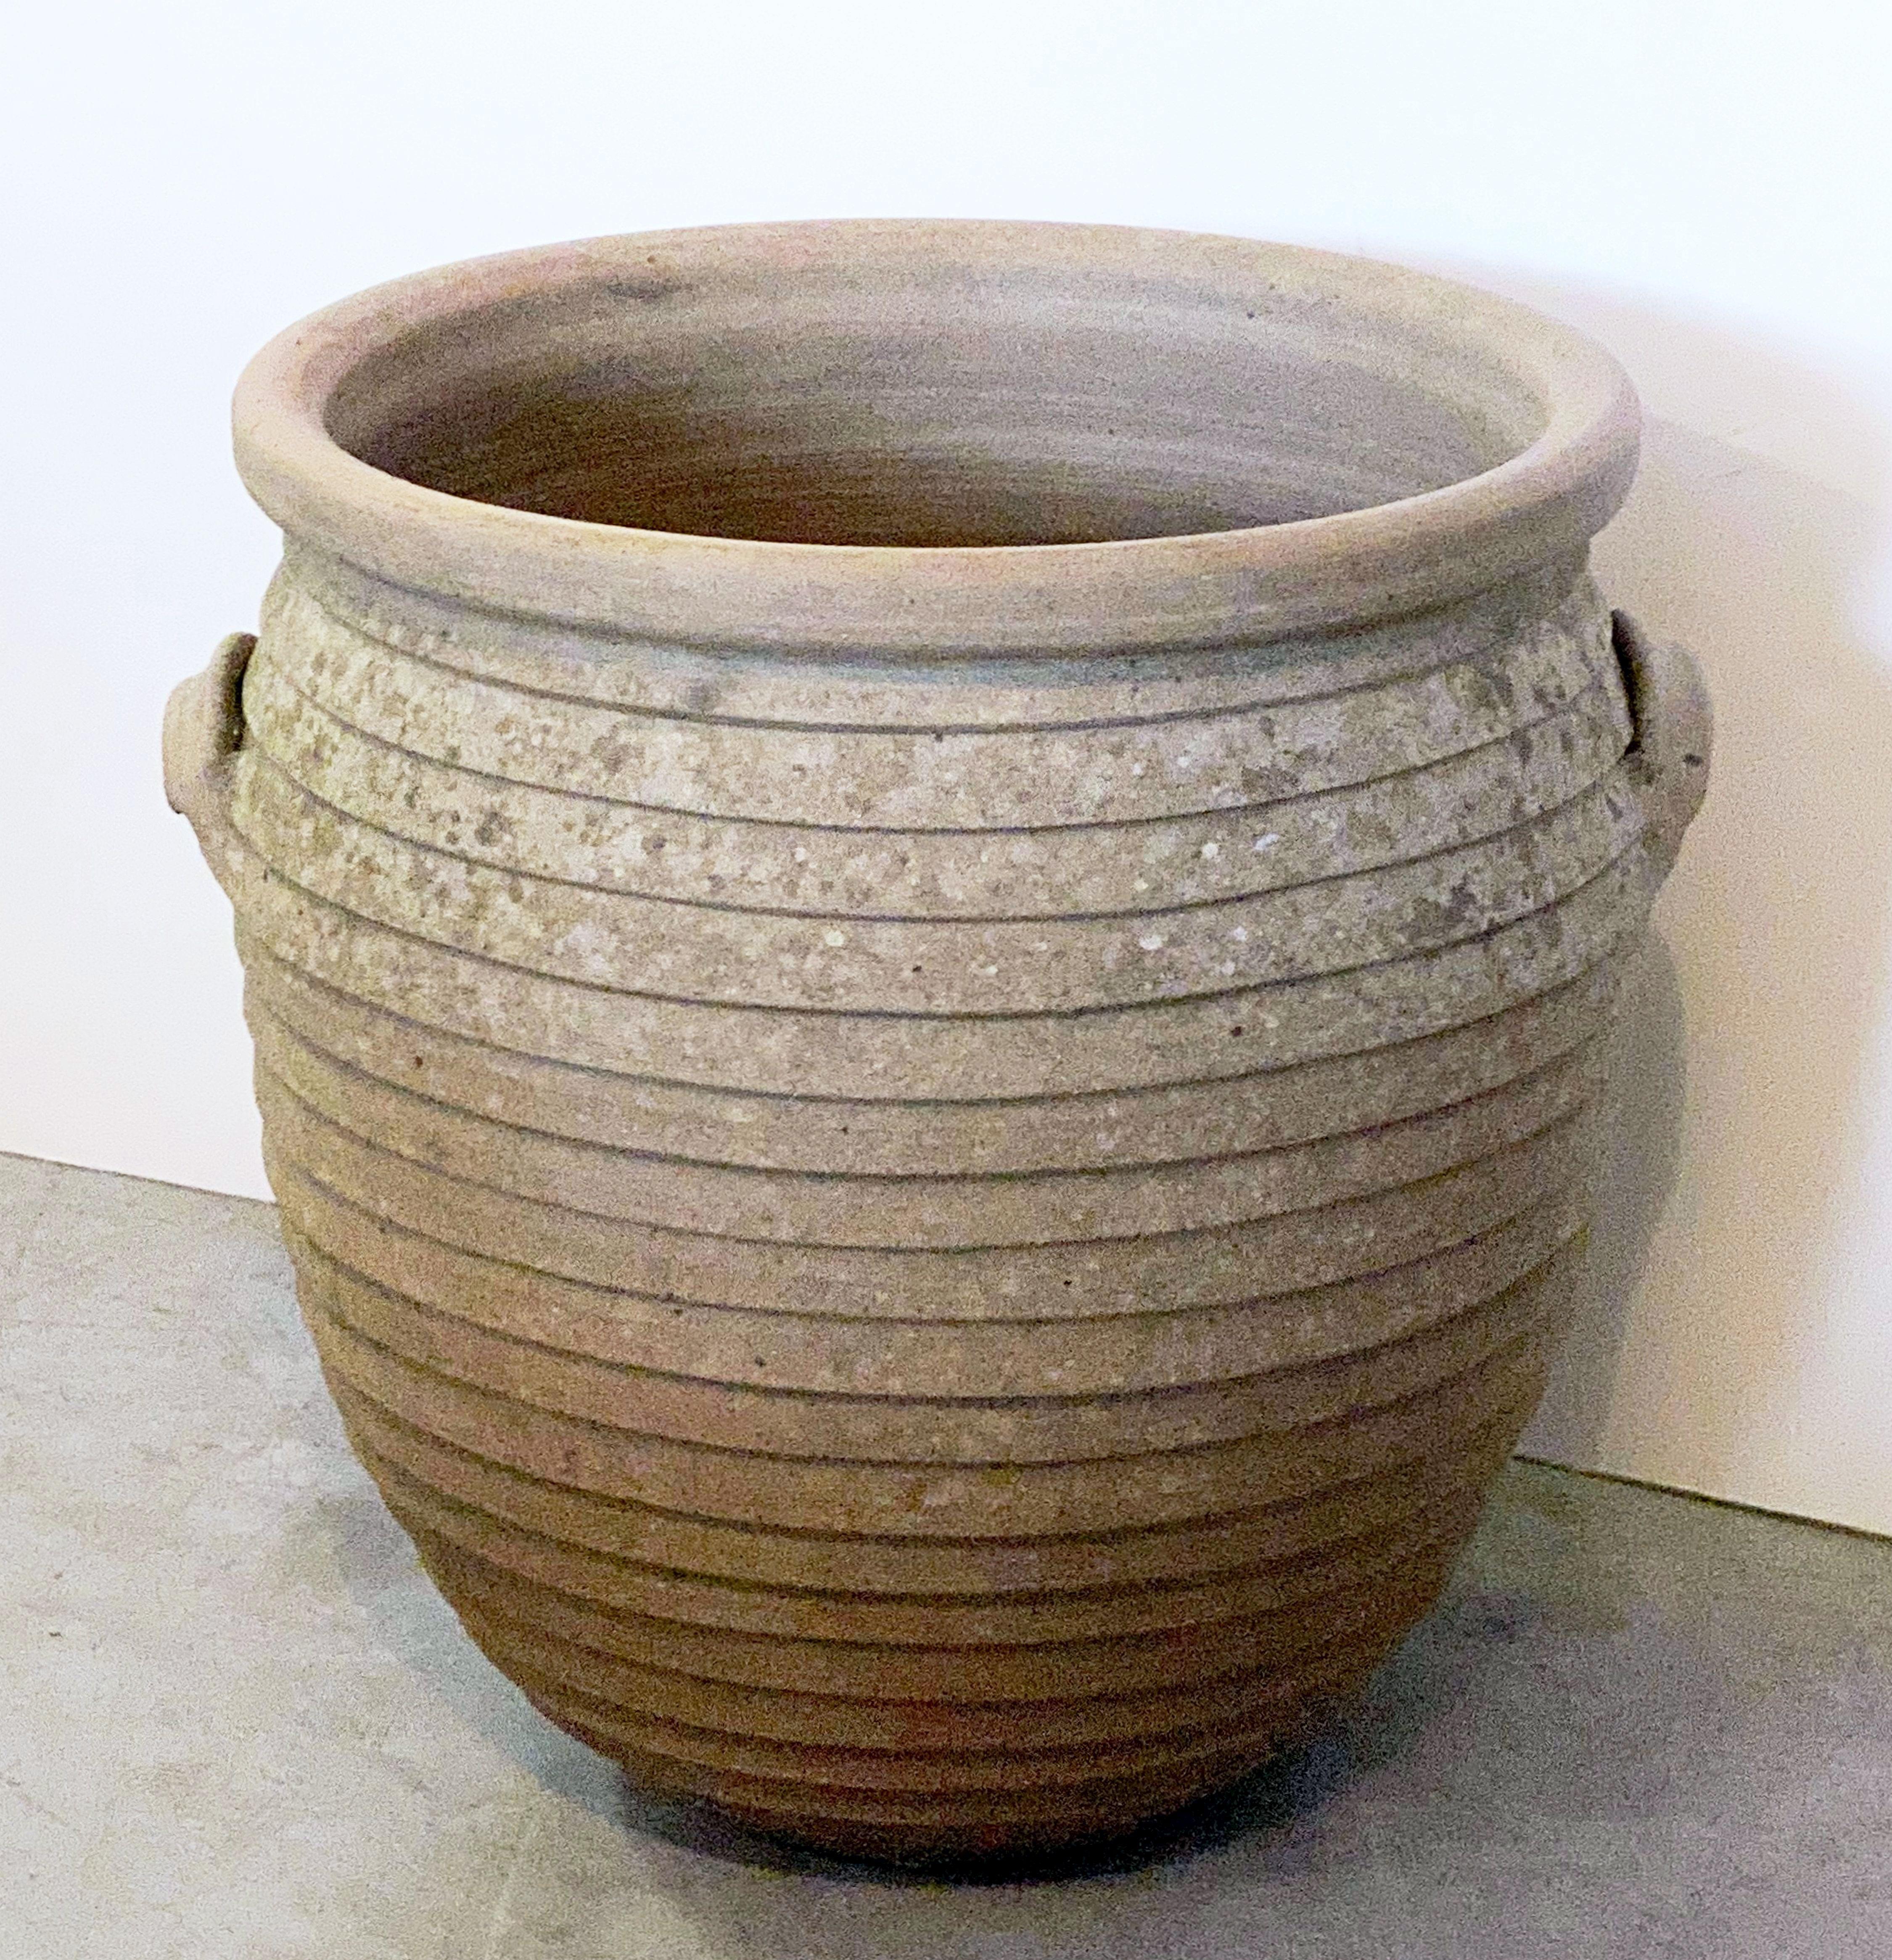 A fine English garden pot or urn of terracotta pottery, featuring a rolled edge over a ribbed design around the circumference of the planter or jar, with two handles.

Dimensions are height 17 1/2 inches x diameter 18 1/2 inches.